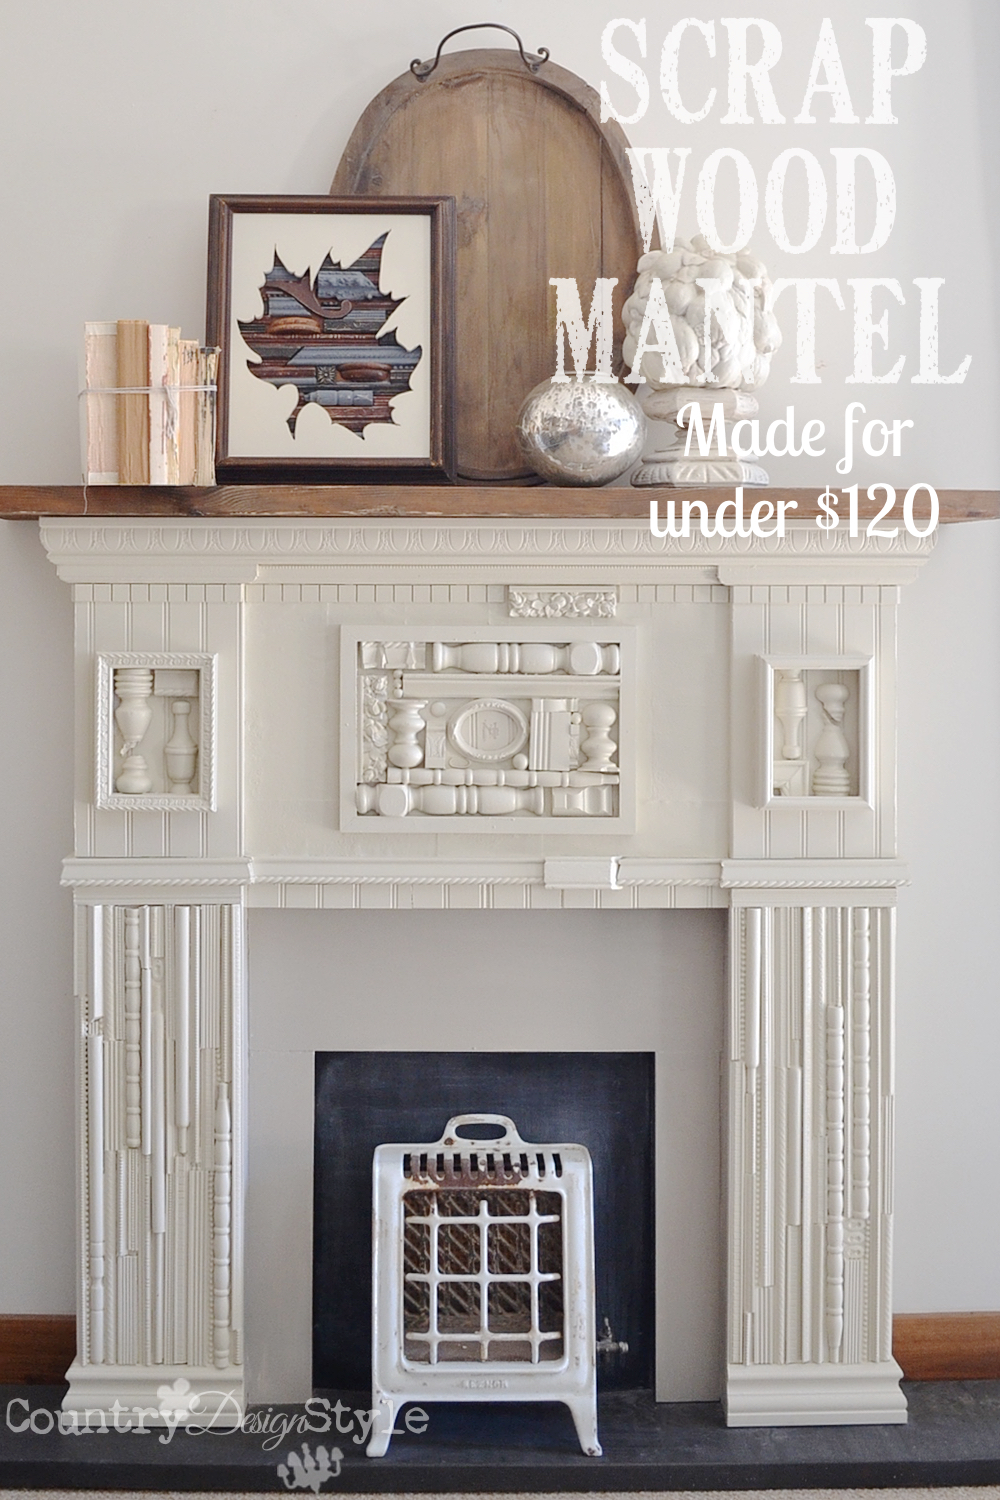 scrap-wood-mantel-country-design-style-pn-text